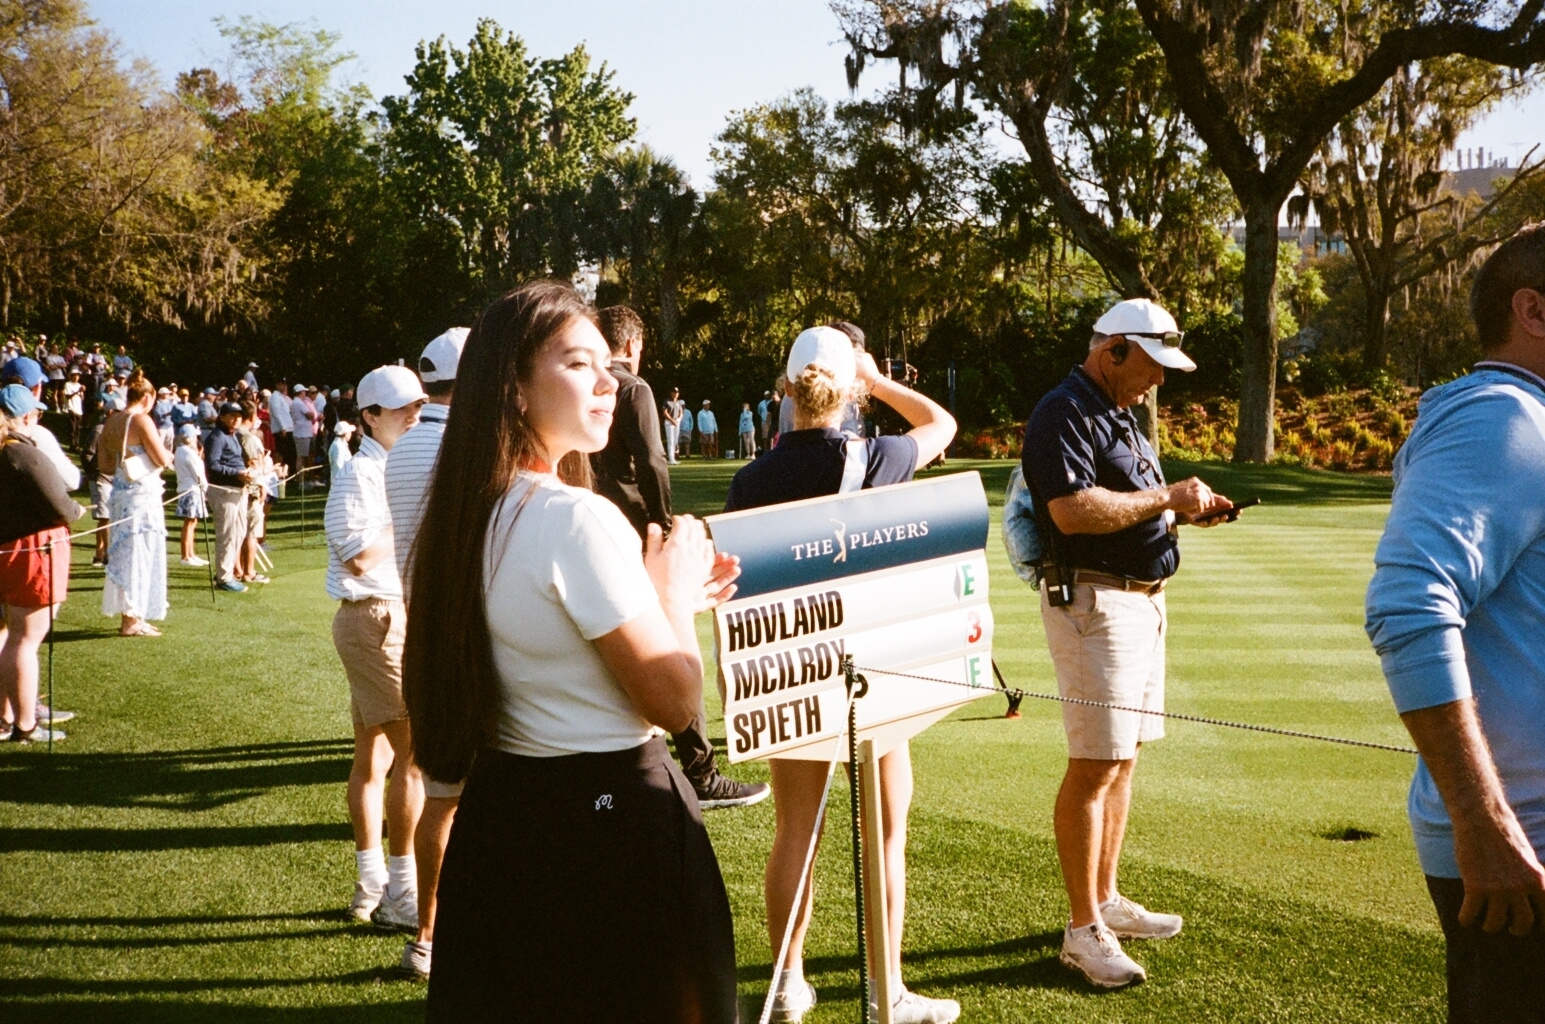 Person holding sign with golfer names Hovland and Spieth at a golf event, with spectators in the background